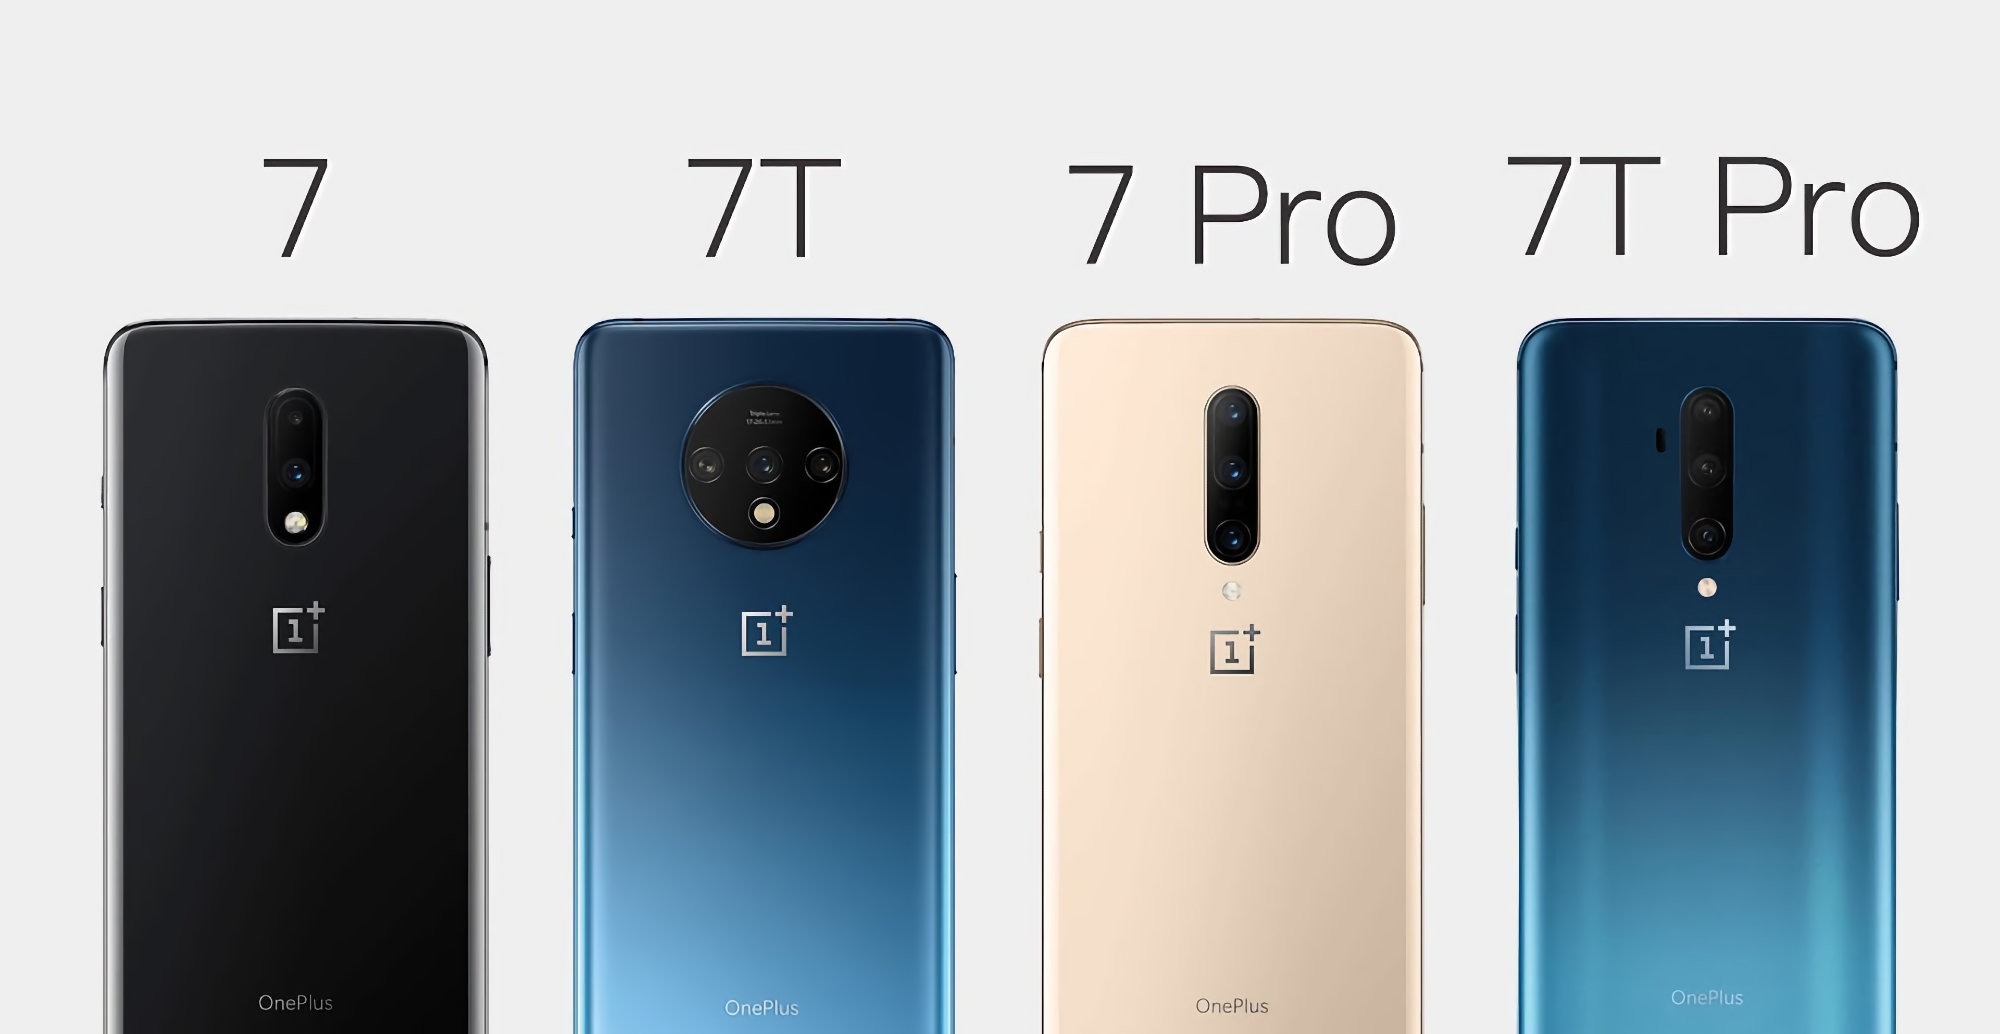 Enfin ! Les OnePlus 7, OnePlus 7 Pro, OnePlus 7T et OnePlus 7T Pro ont reçu une version stable d'Android 12 avec OxygenOS 12.